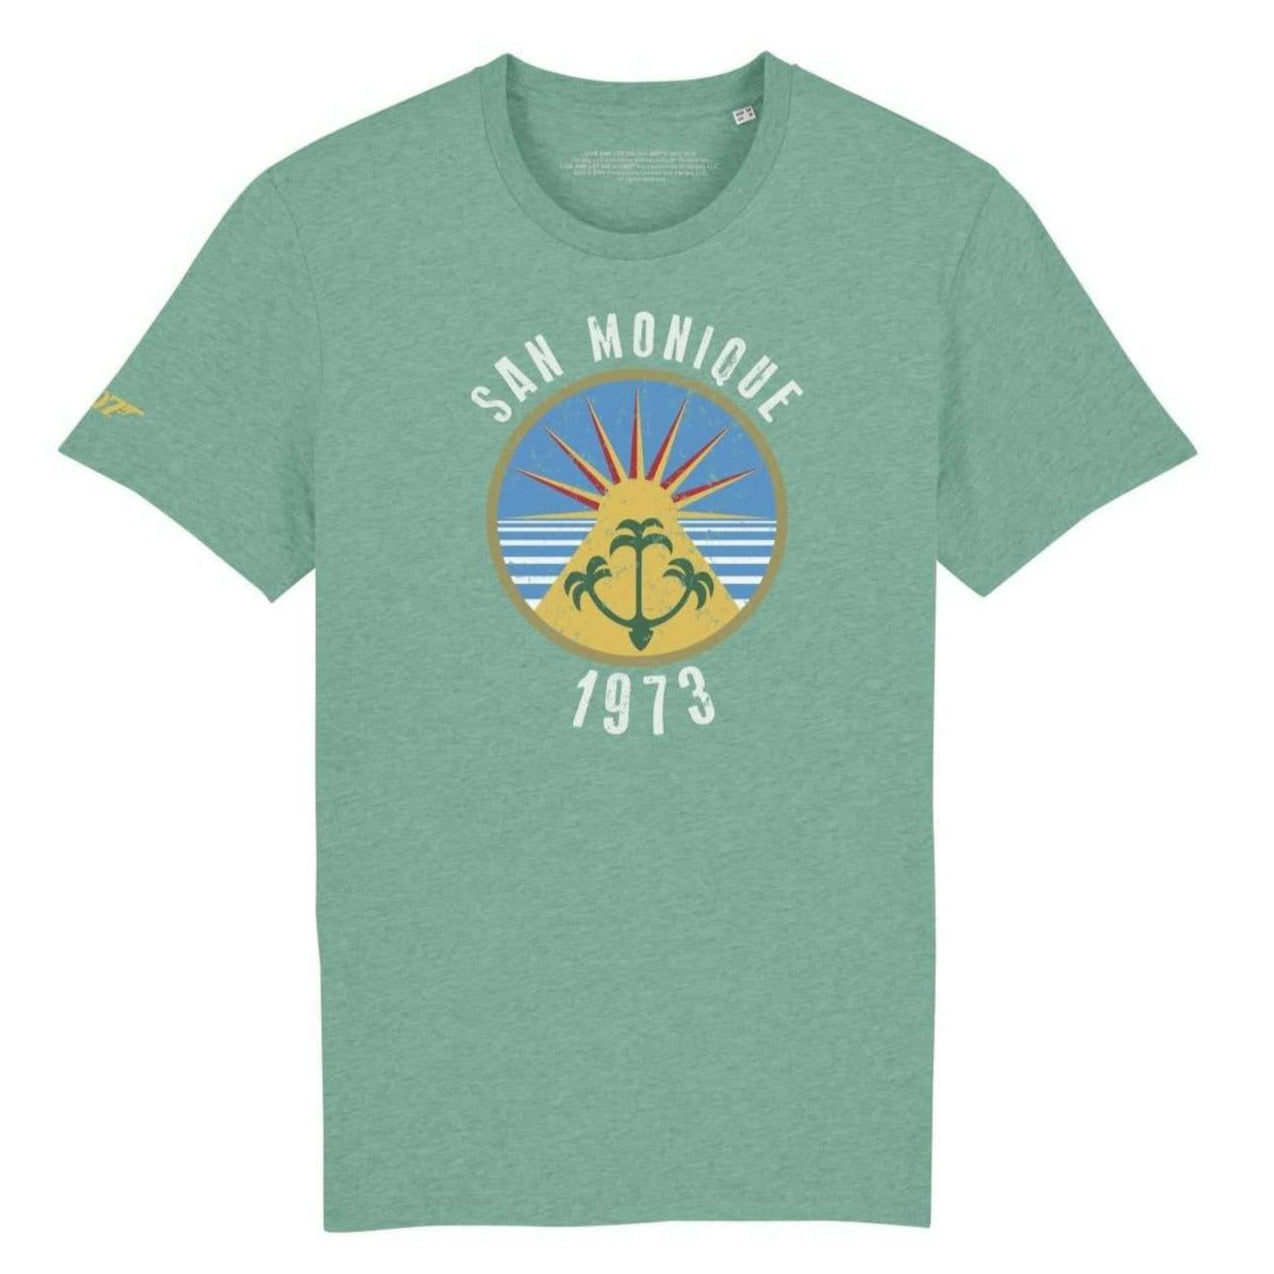 Sea Green San Monique Island T-Shirt - Live And Let Die Limited Edition - 007STORE